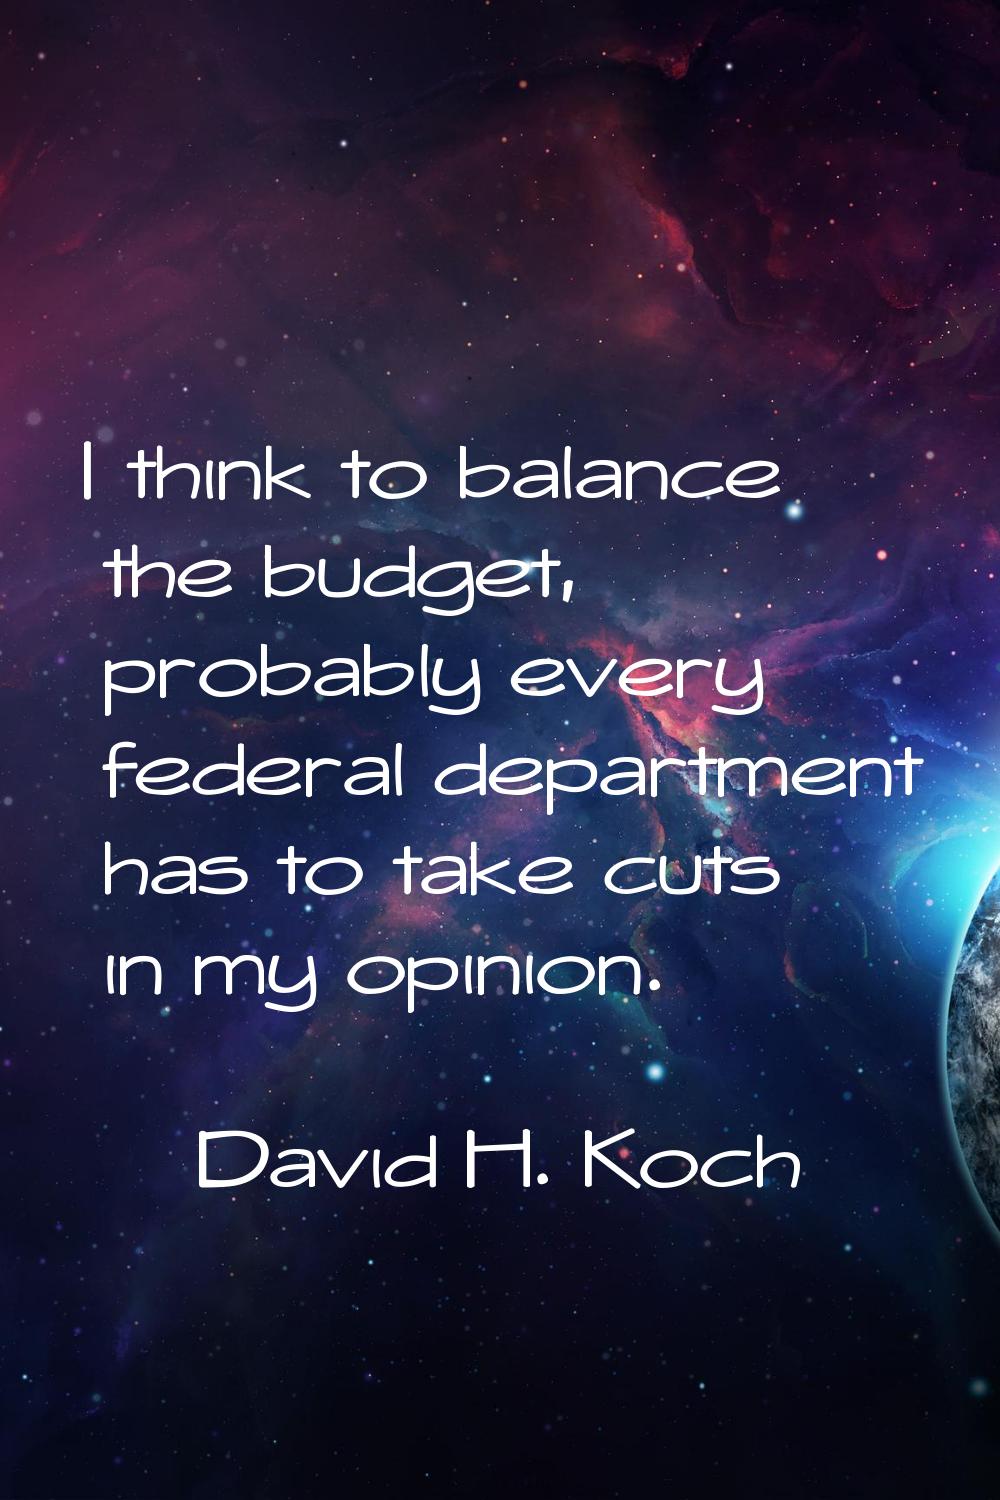 I think to balance the budget, probably every federal department has to take cuts in my opinion.